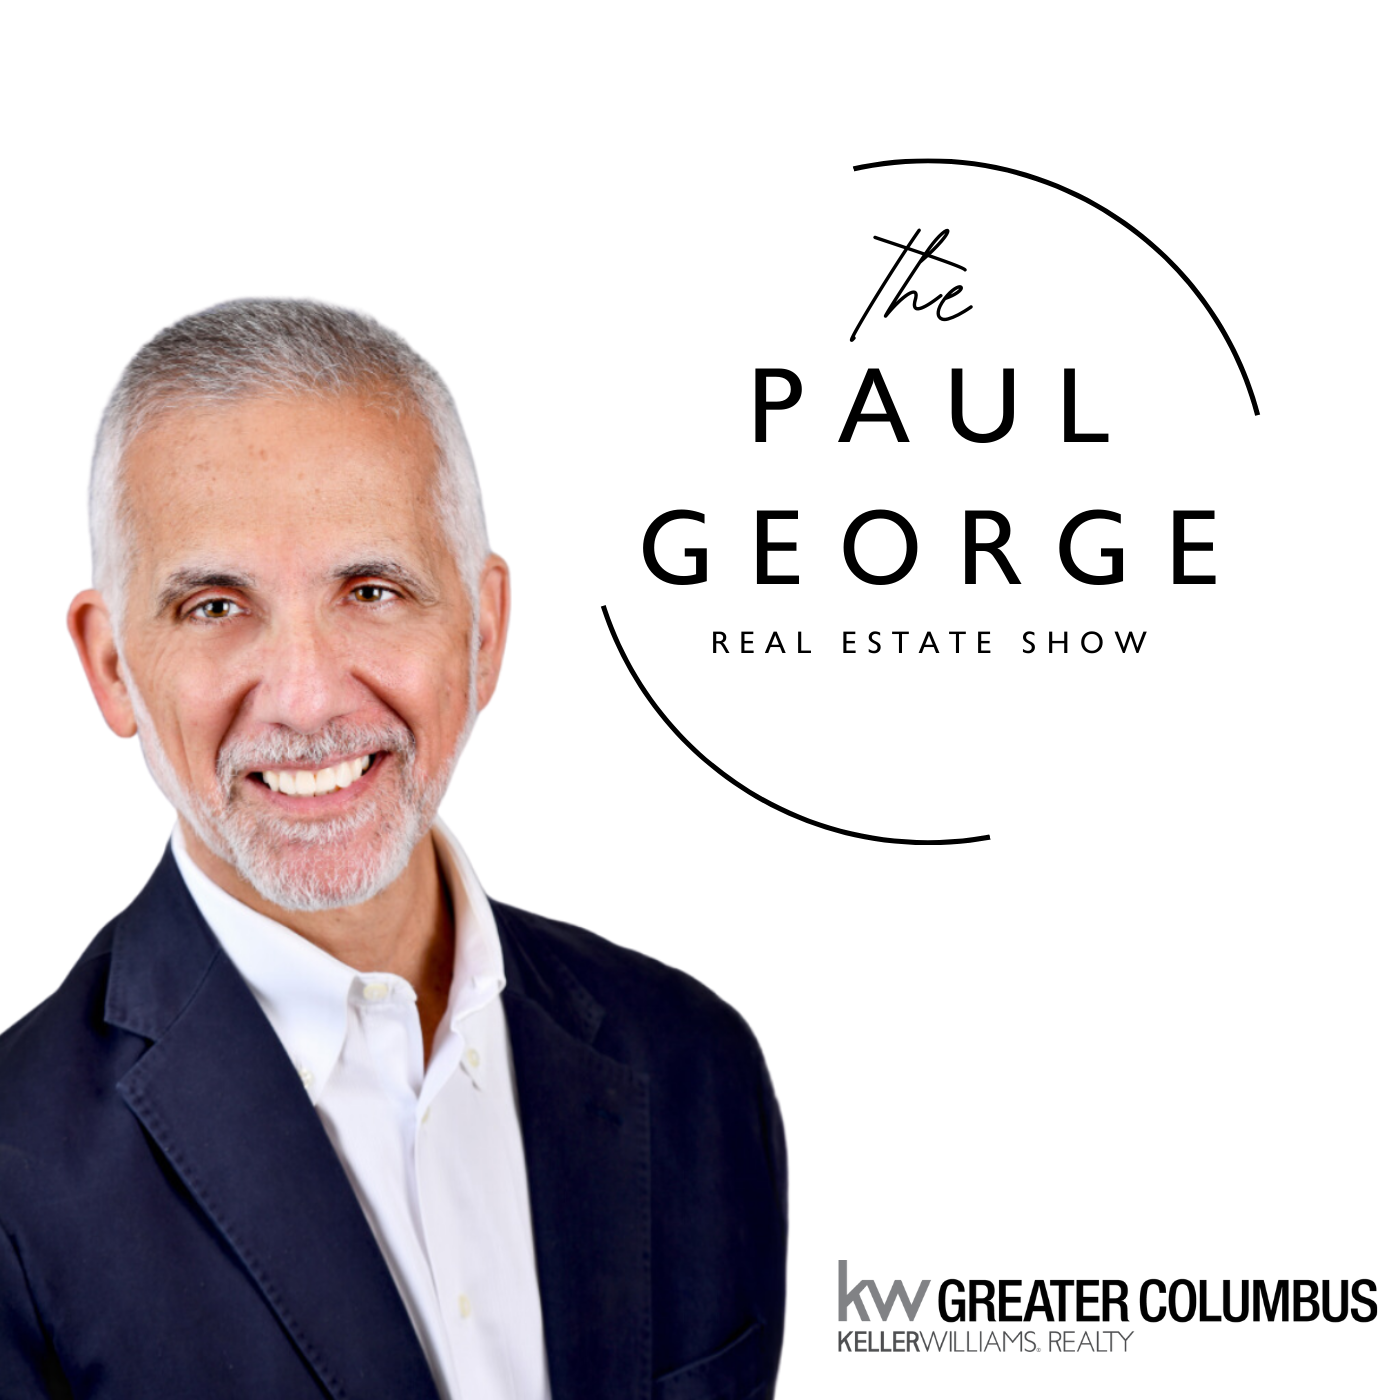 The Paul George Real Estate Show